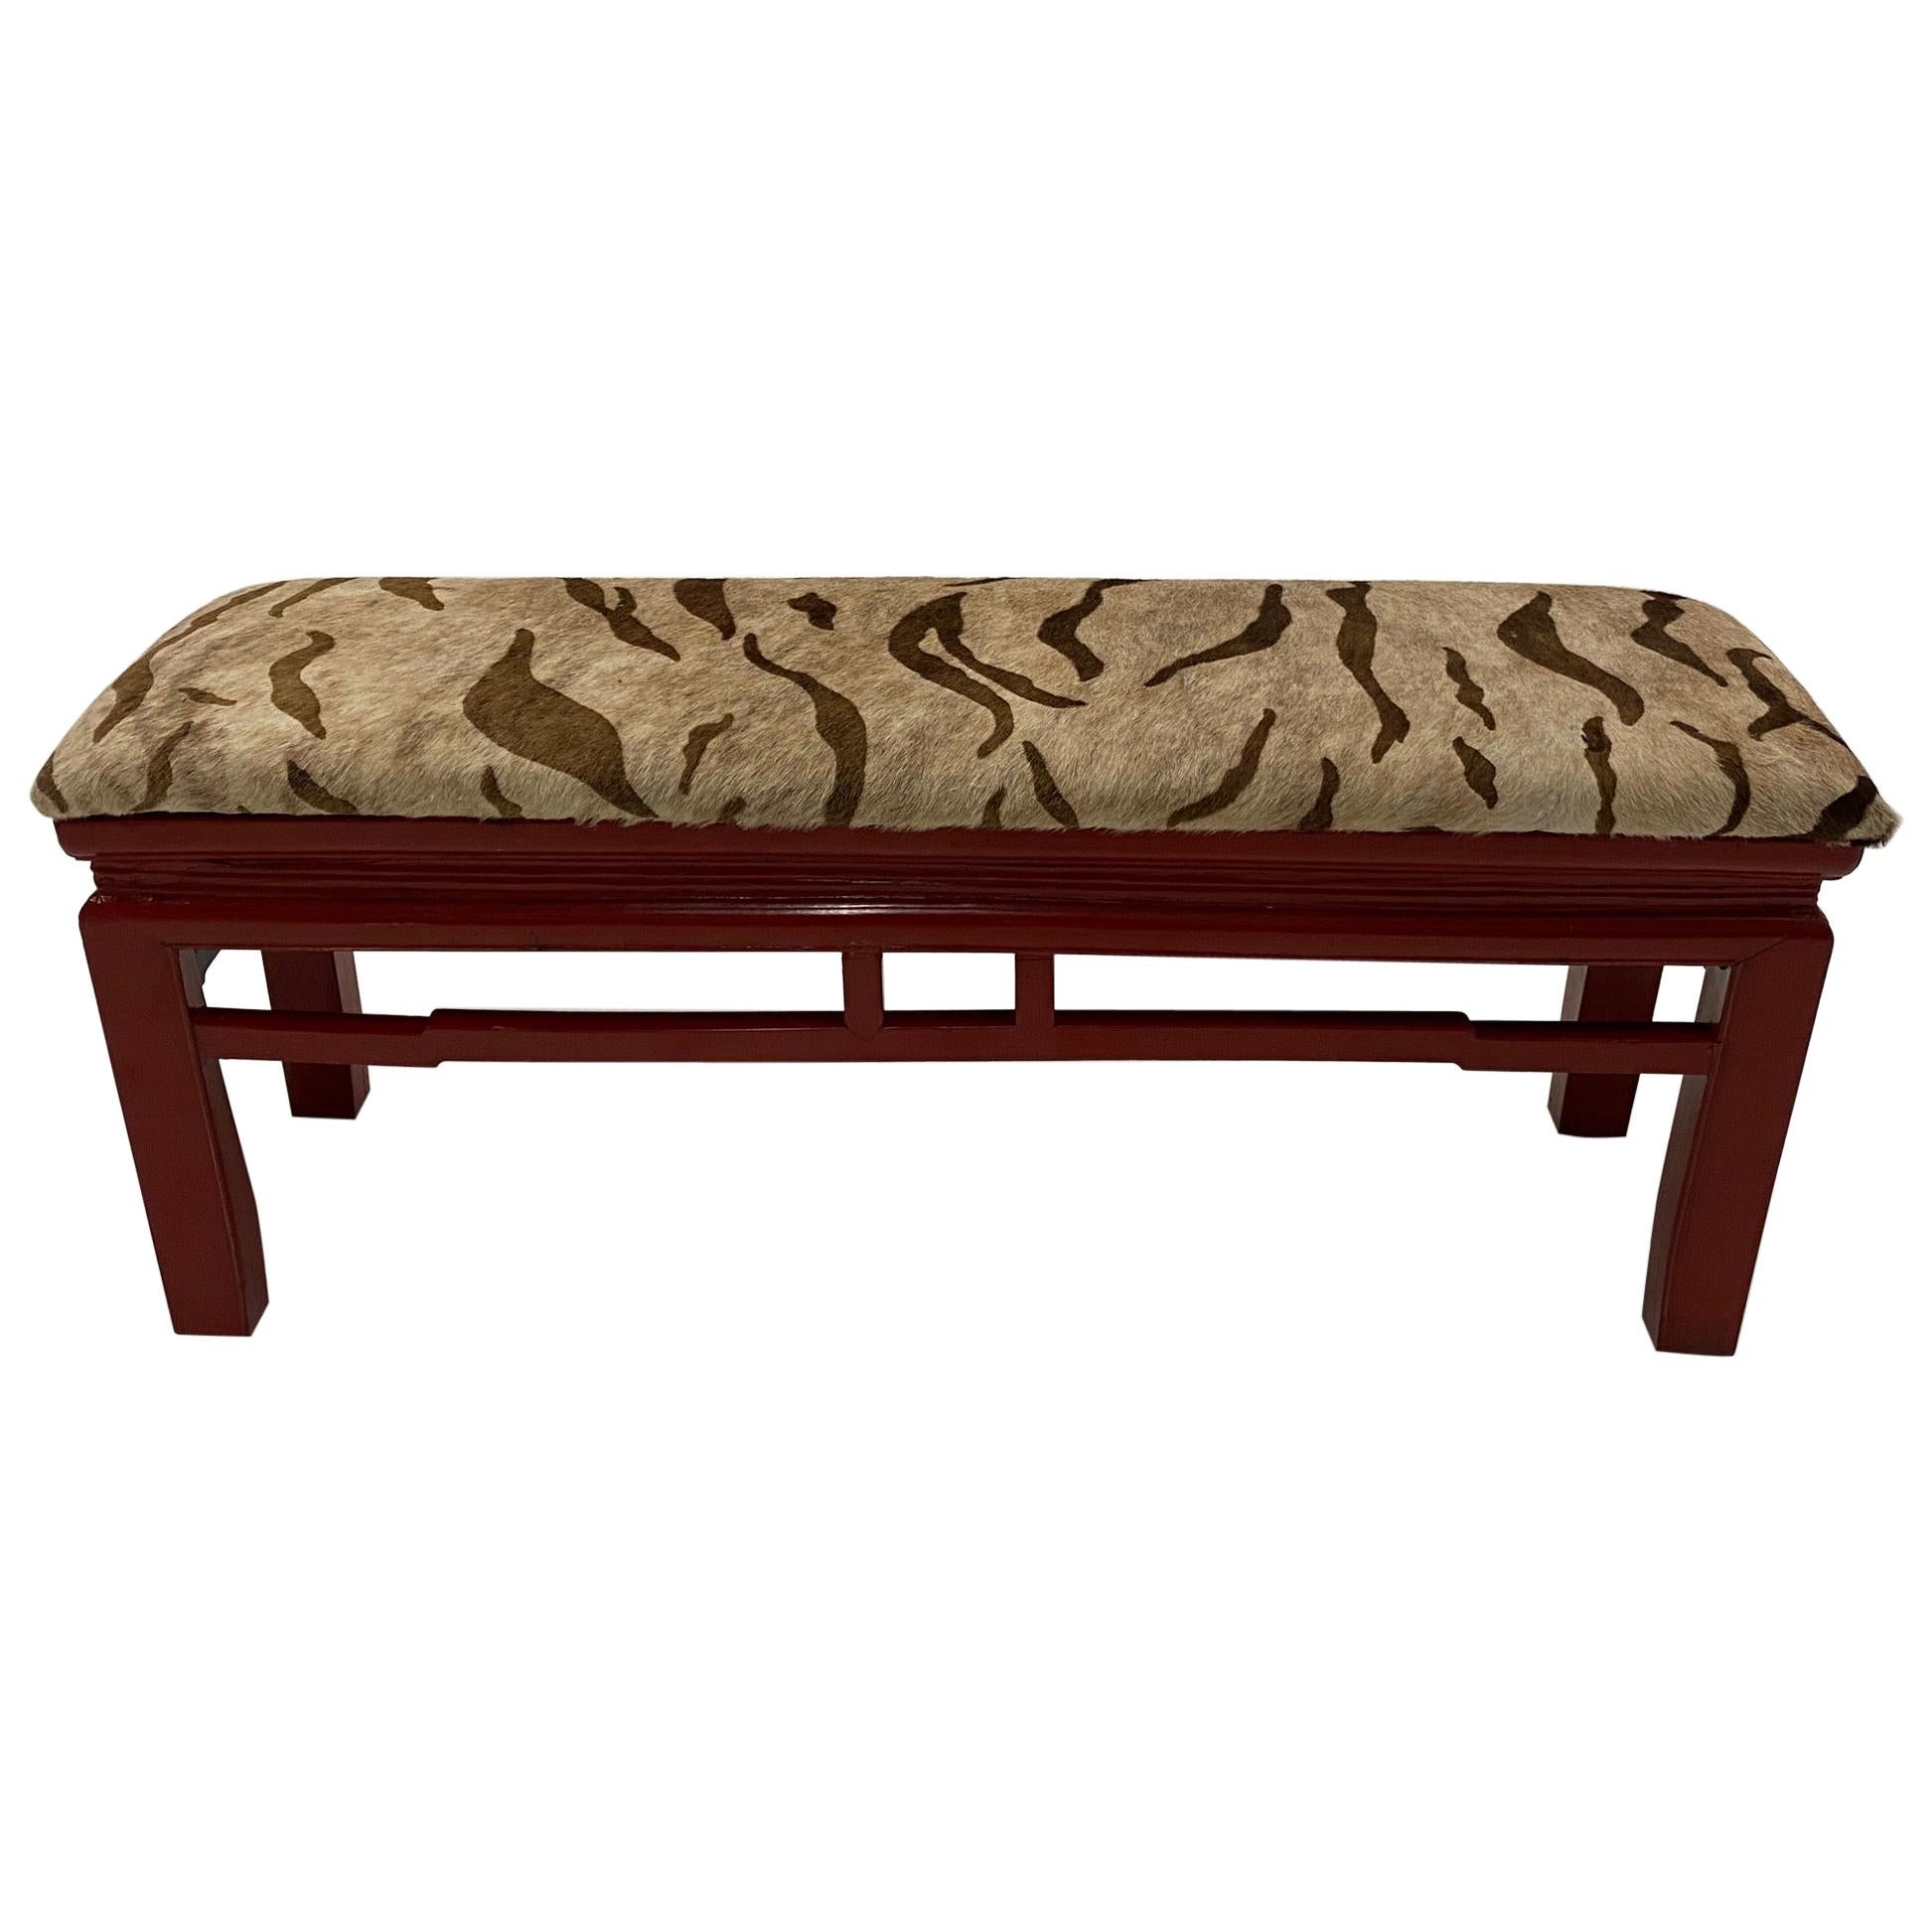 Stunning Asian Cinnabar Red Lacquer Bench Upholstered in Printed Cowhide